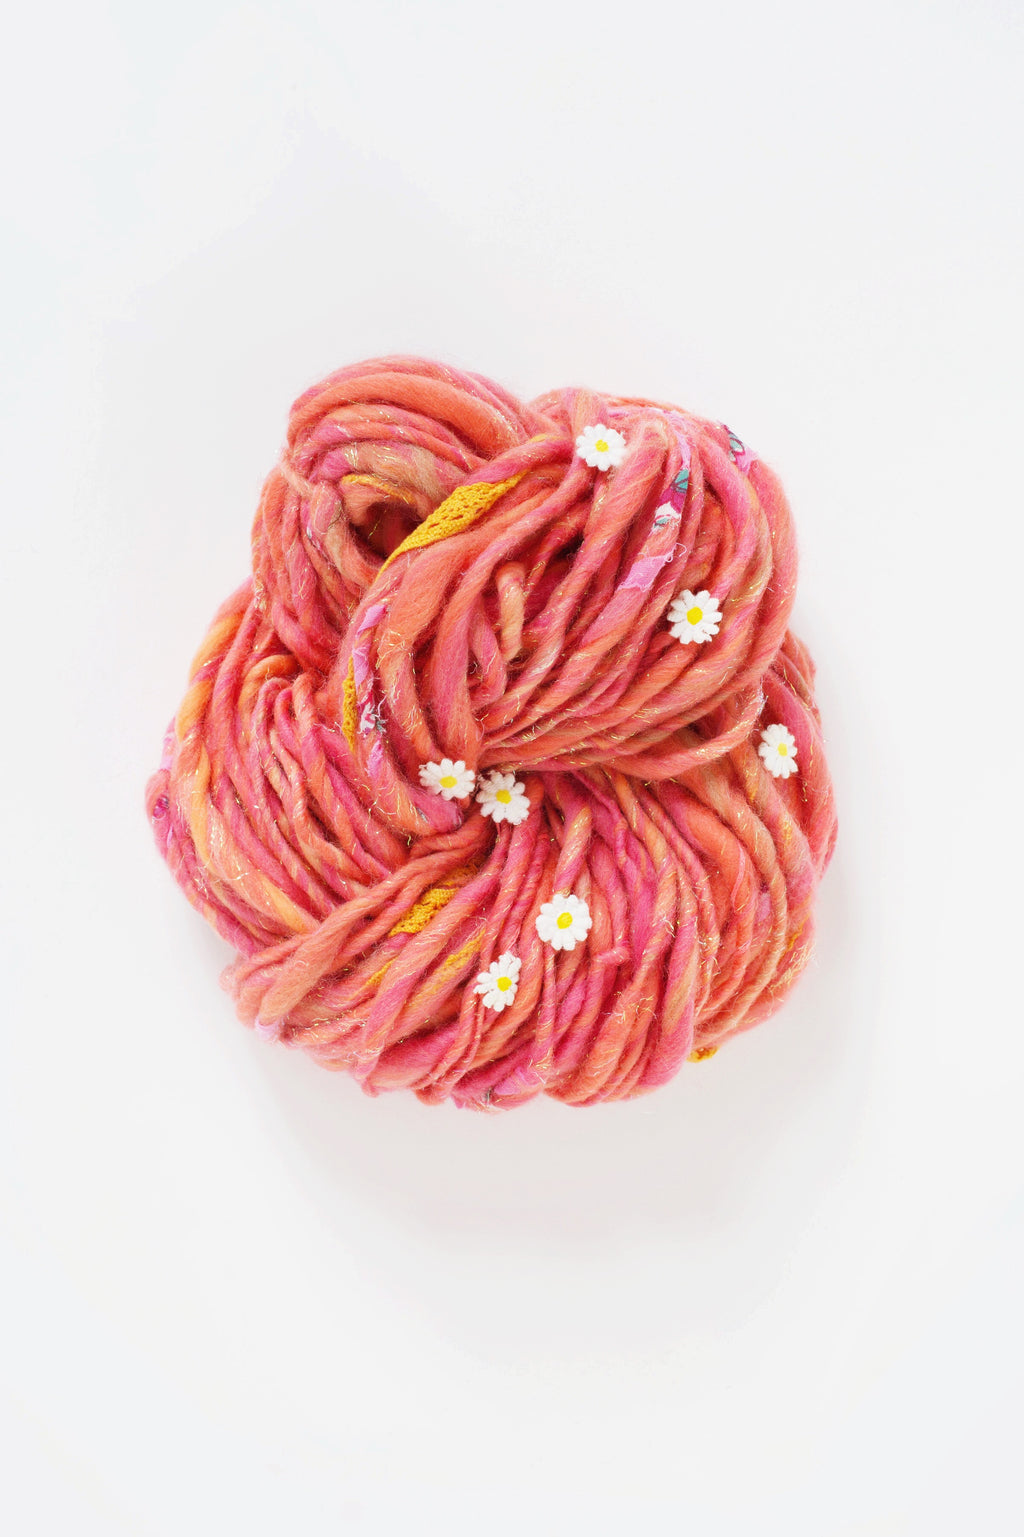 Daisy Chain Yarn in Peony Pink by Knit Collage - Chunky bulky Hand knitting yarn